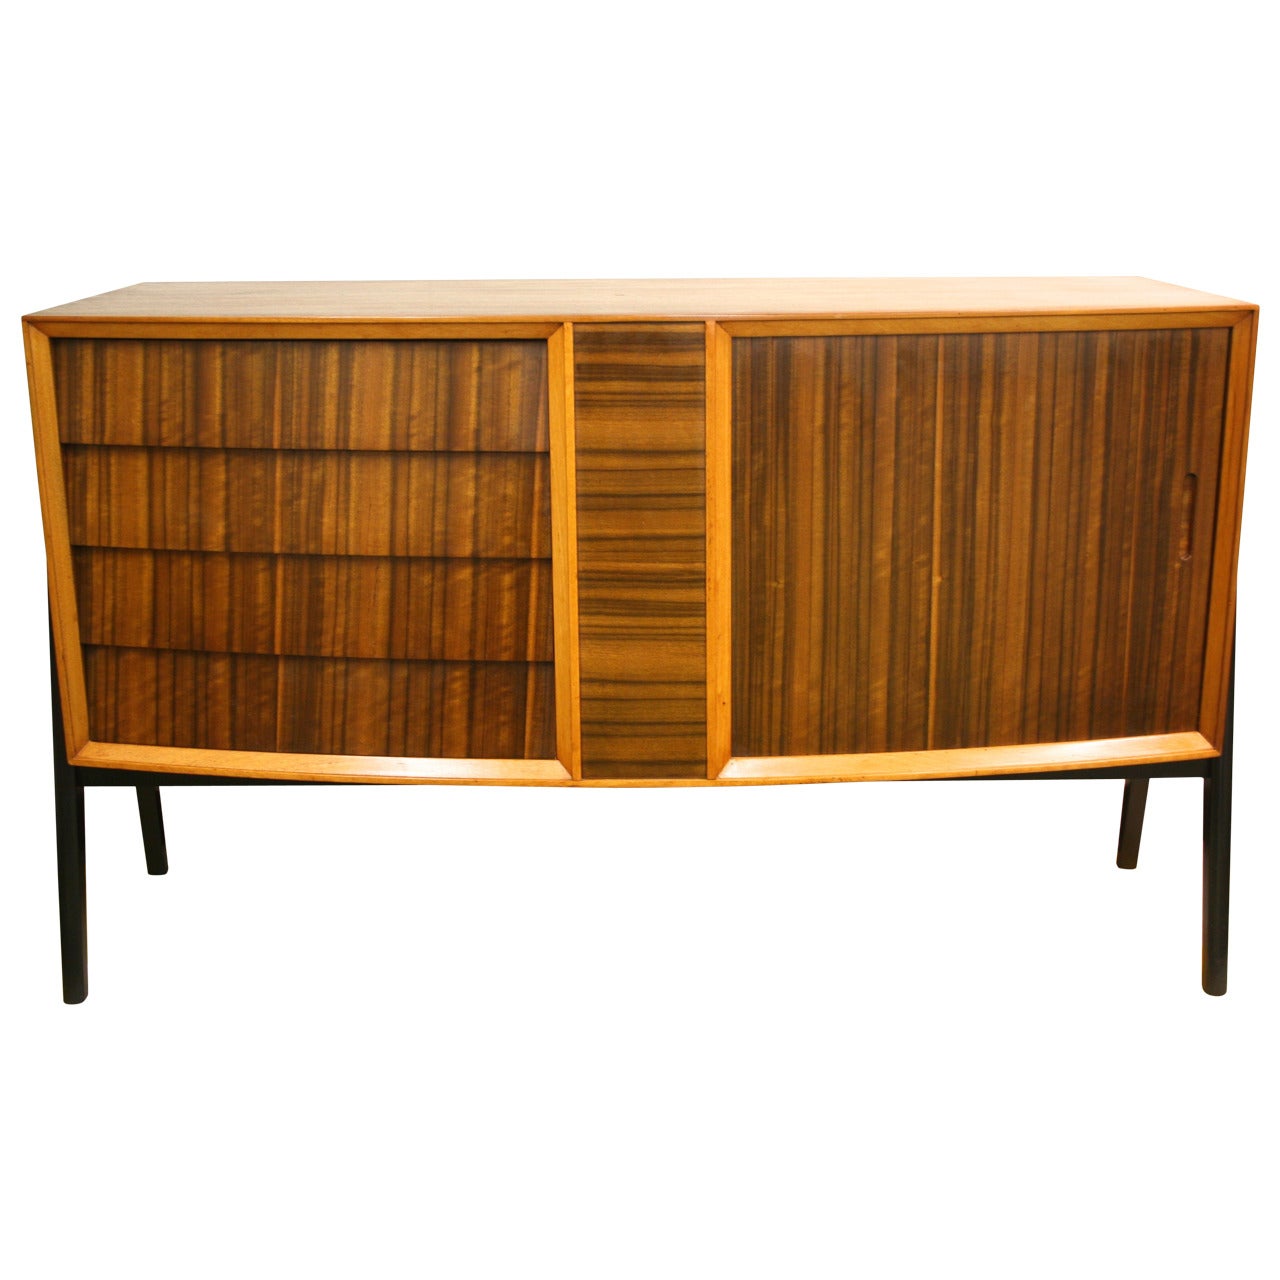 Mid-Century Modern Credenza with Curved Front and Tambour Door